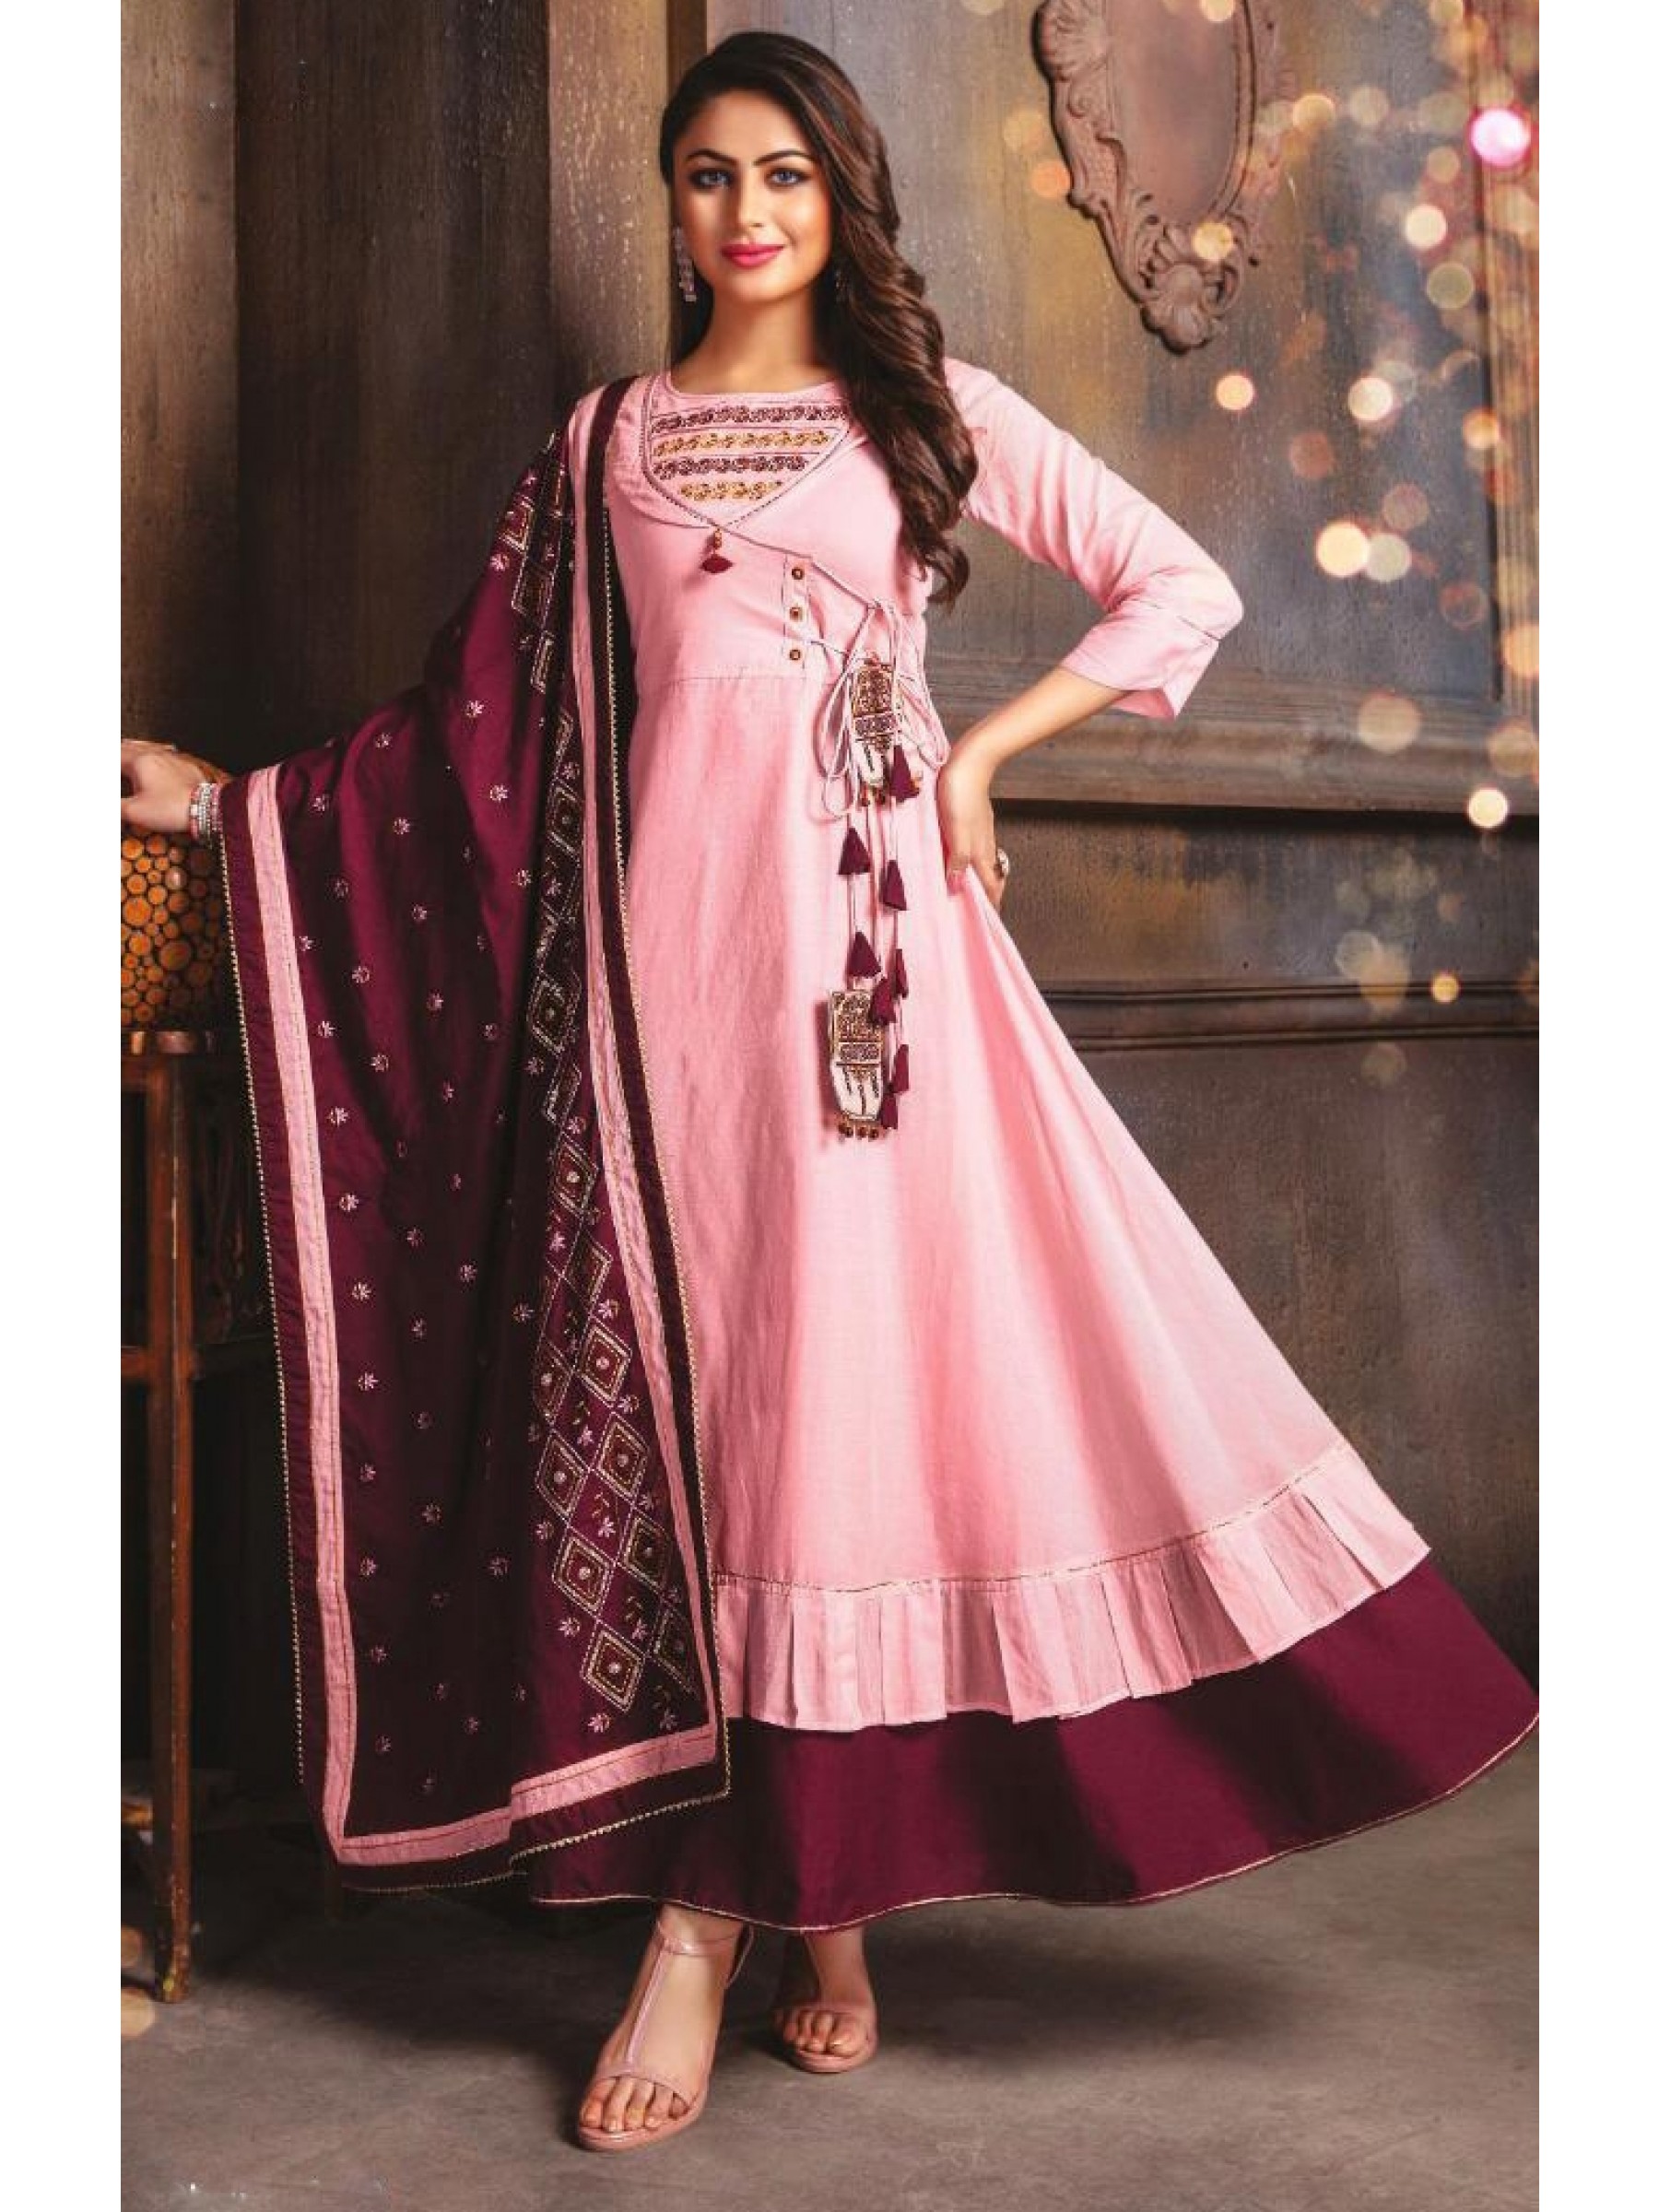 Cotton mal Fabrics Long Kurti With Dupatta  In Pink Color With Embroidery